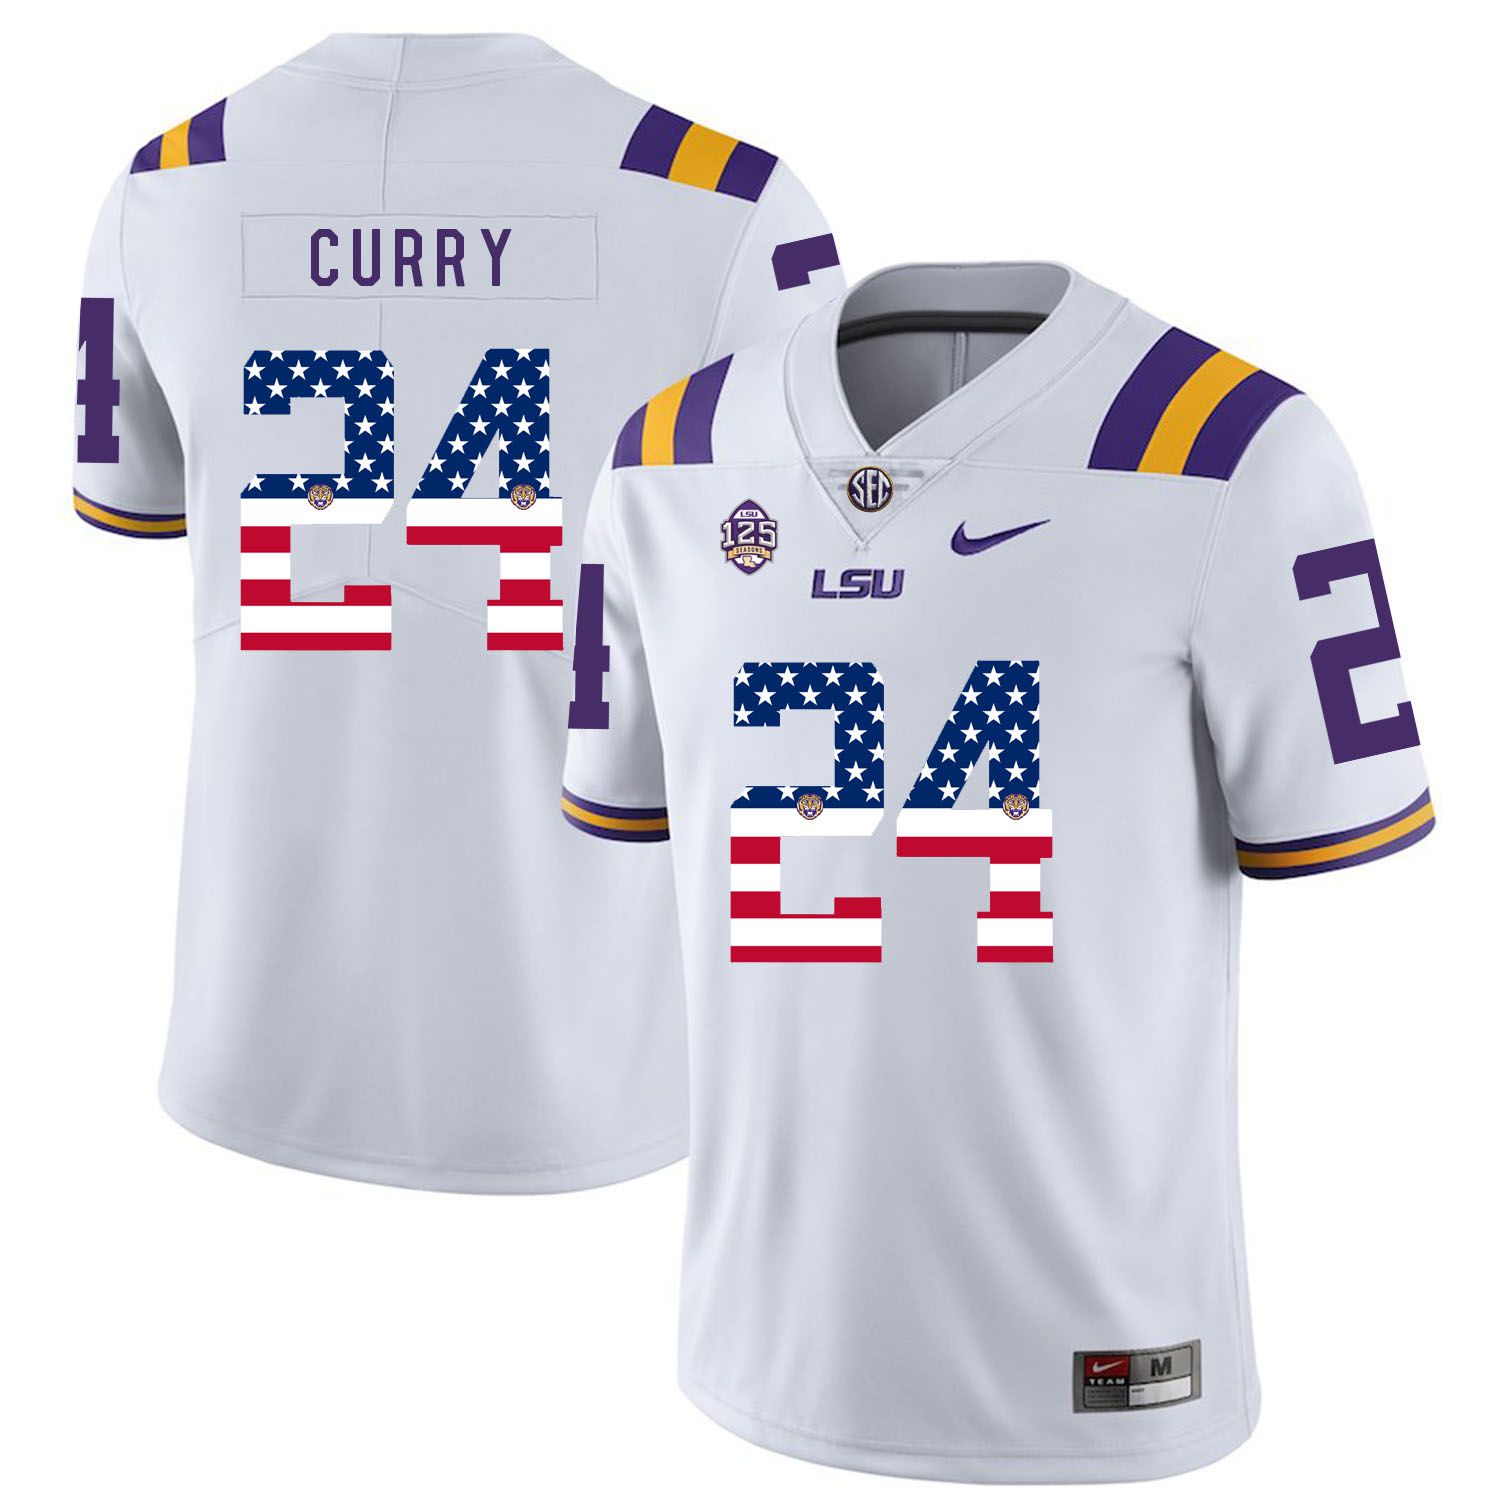 Men LSU Tigers 24 Curry White Flag Customized NCAA Jerseys